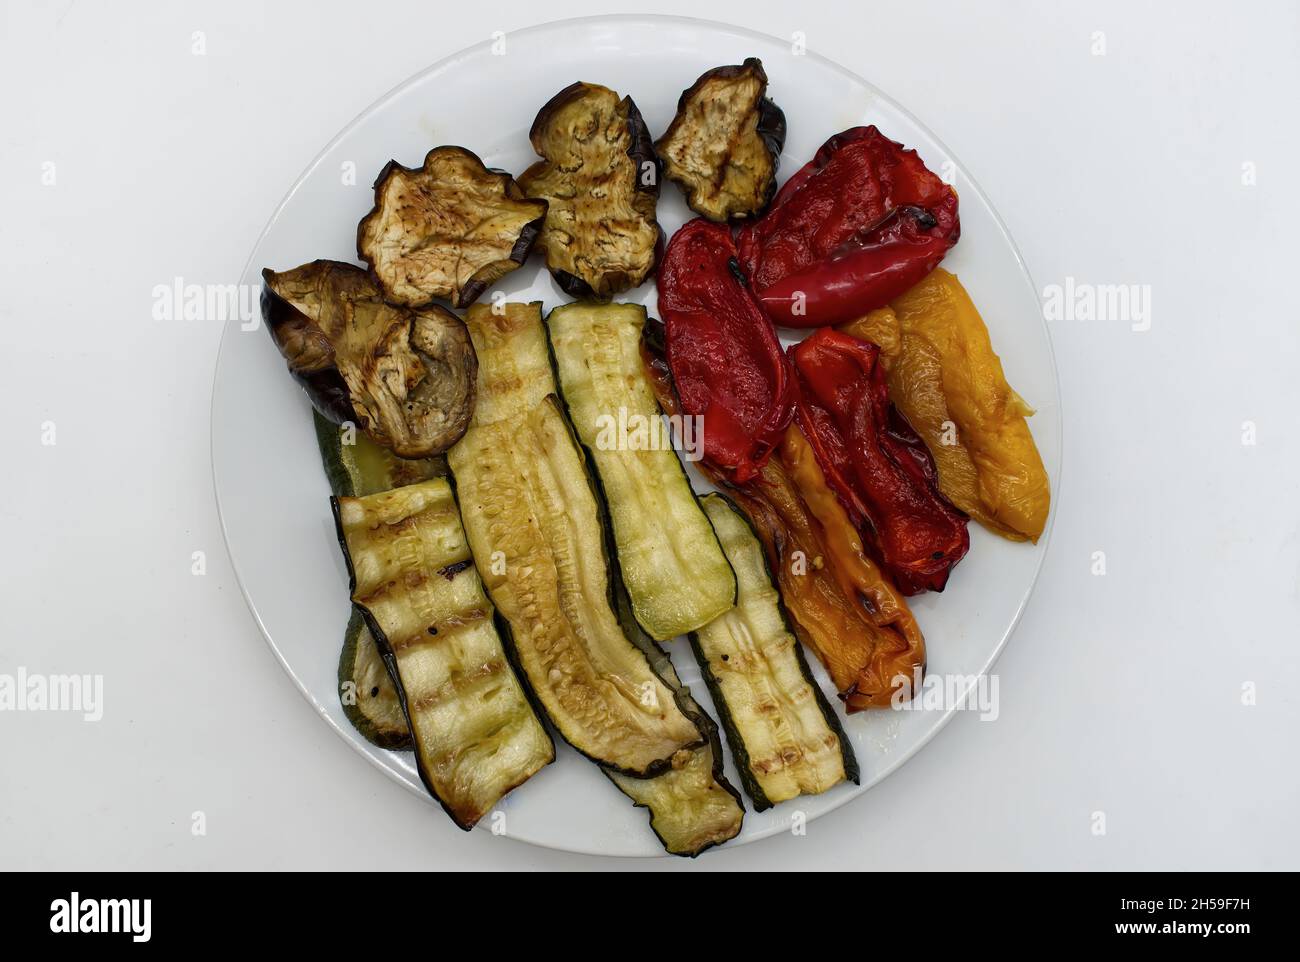 Grilled mix vegetables in a dish isolated on white background. View from above Stock Photo